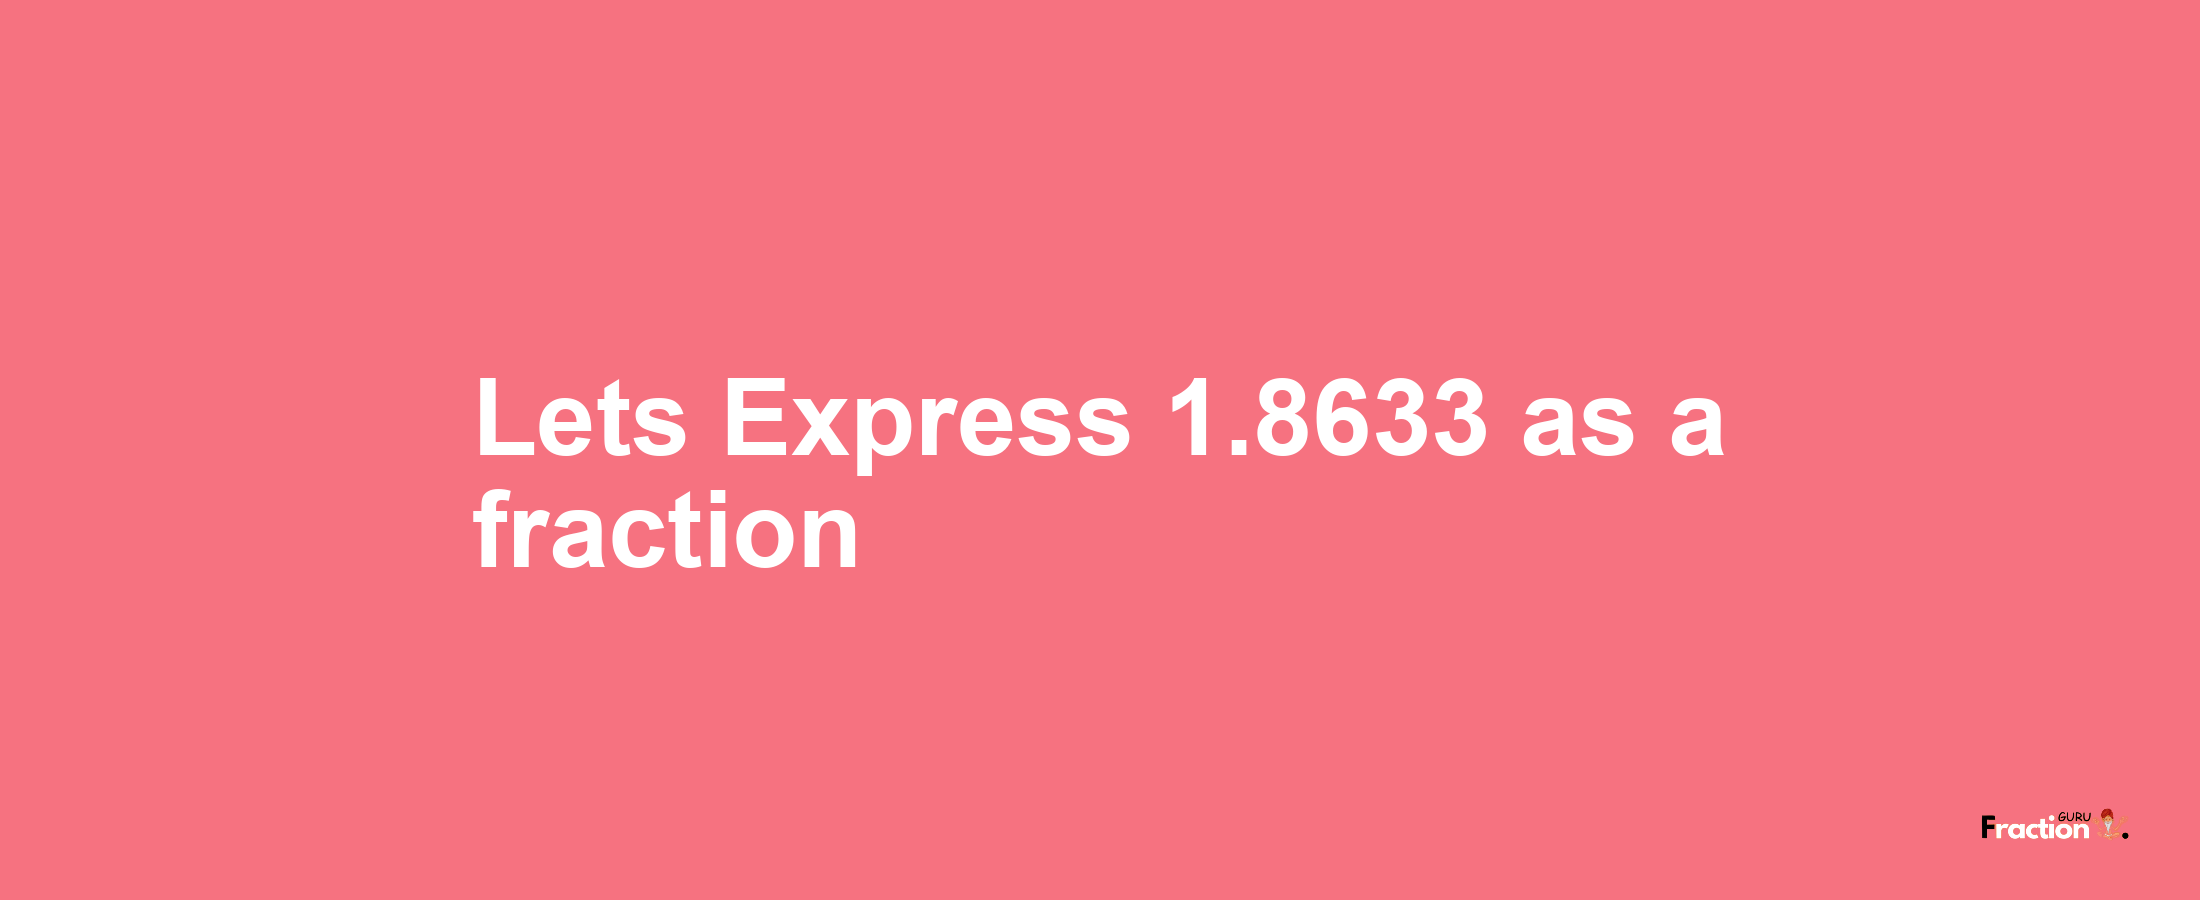 Lets Express 1.8633 as afraction